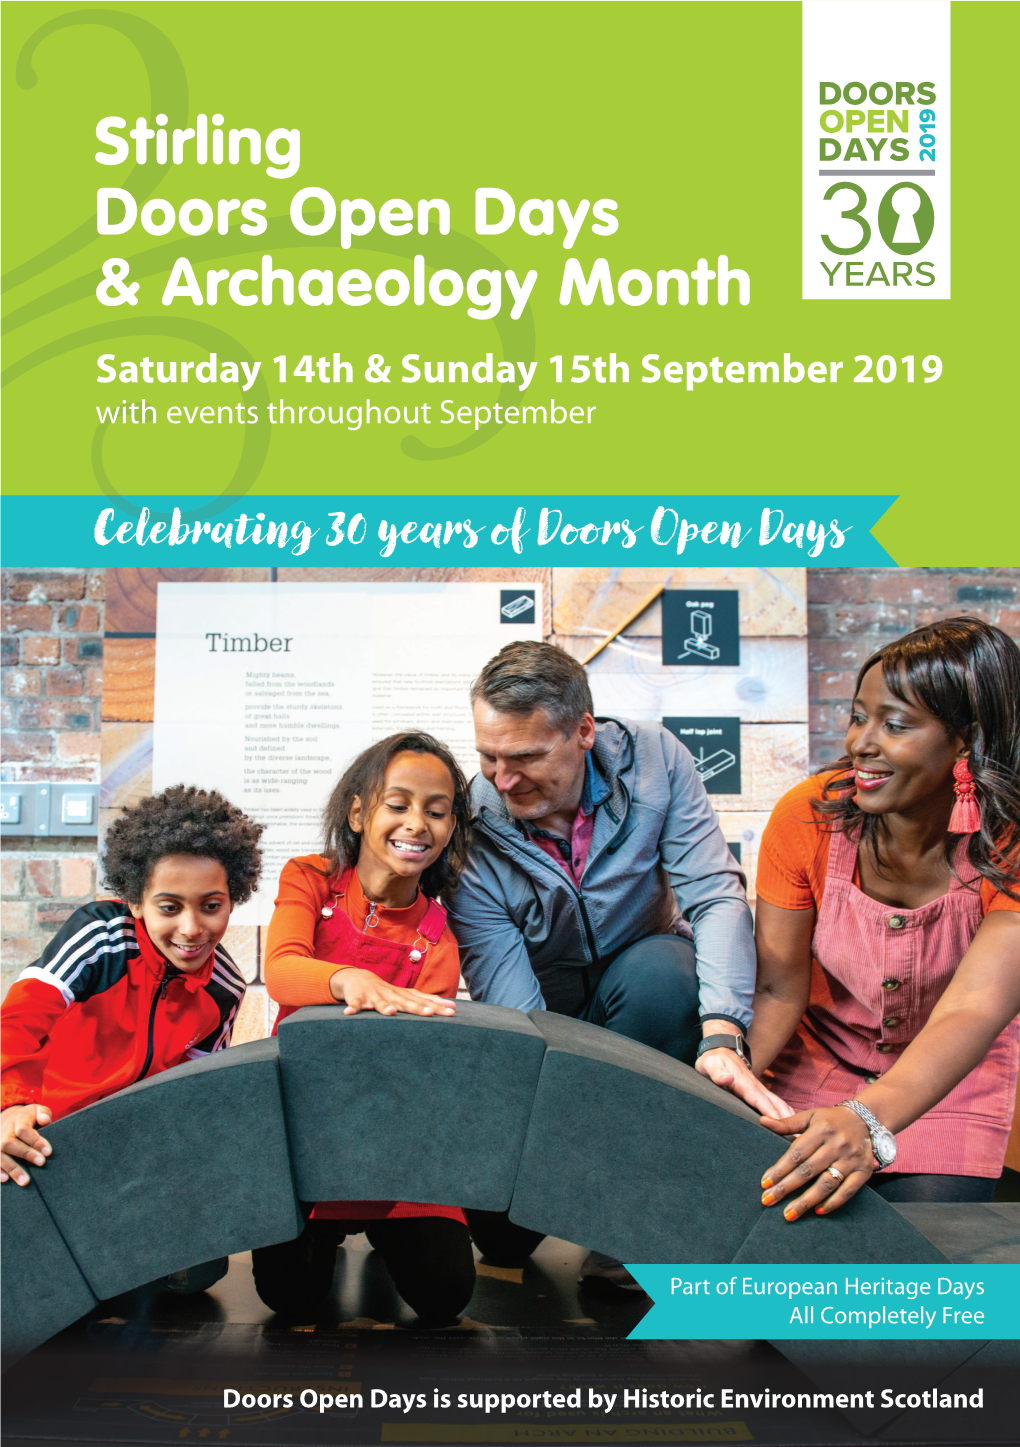 Stirling Doors Open Days & Archaeology Month